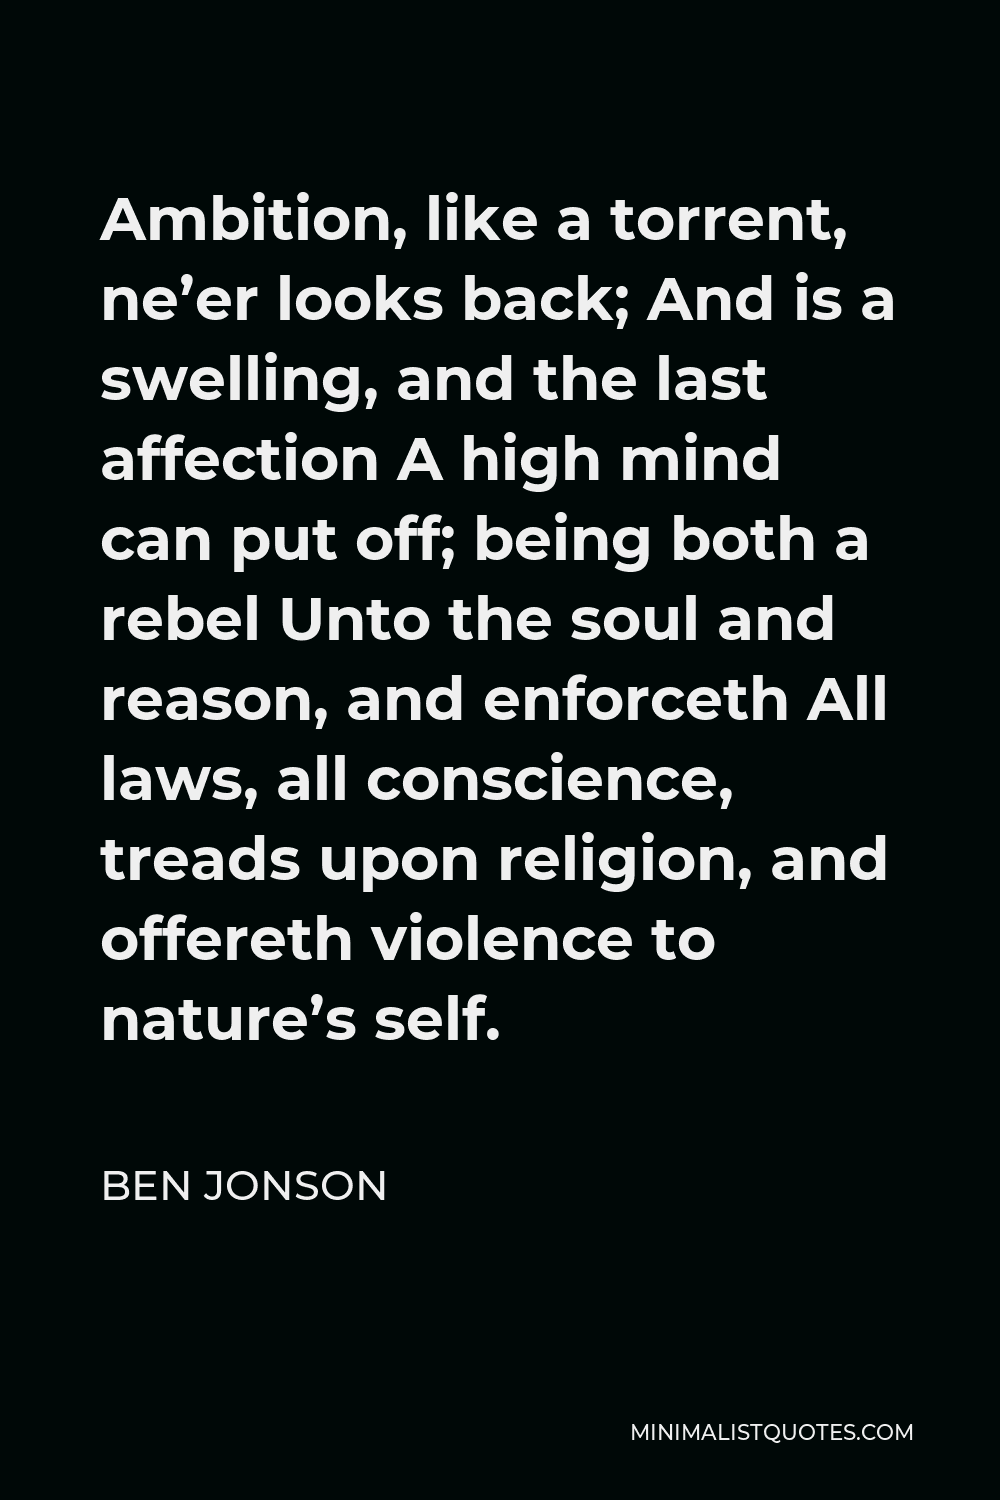 Ben Jonson Quote - Ambition, like a torrent, ne’er looks back; And is a swelling, and the last affection A high mind can put off; being both a rebel Unto the soul and reason, and enforceth All laws, all conscience, treads upon religion, and offereth violence to nature’s self.